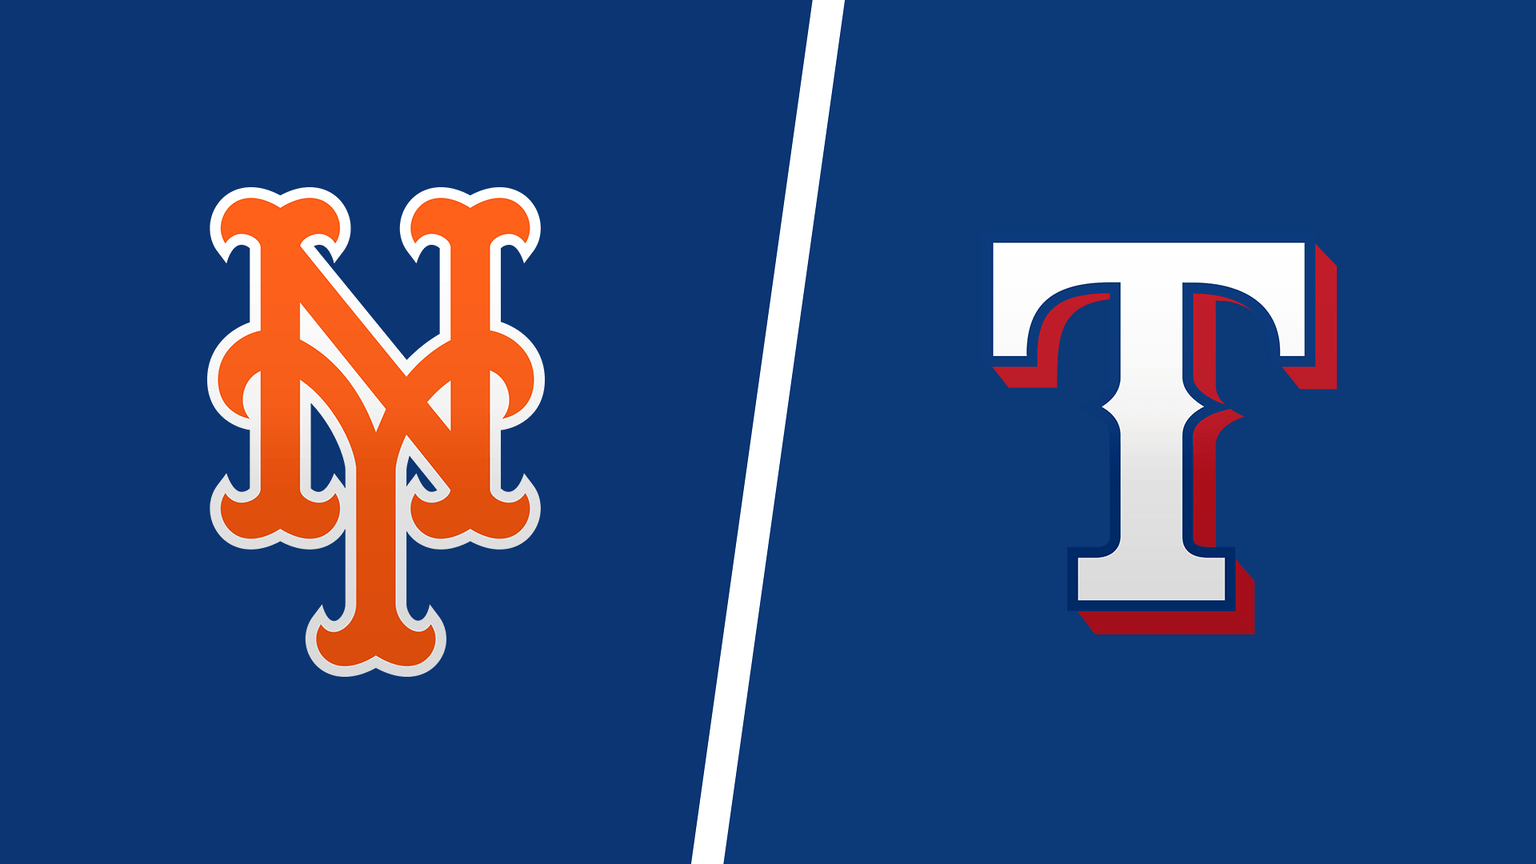 How to Watch Texas Rangers vs. New York Mets Live Online on July 1